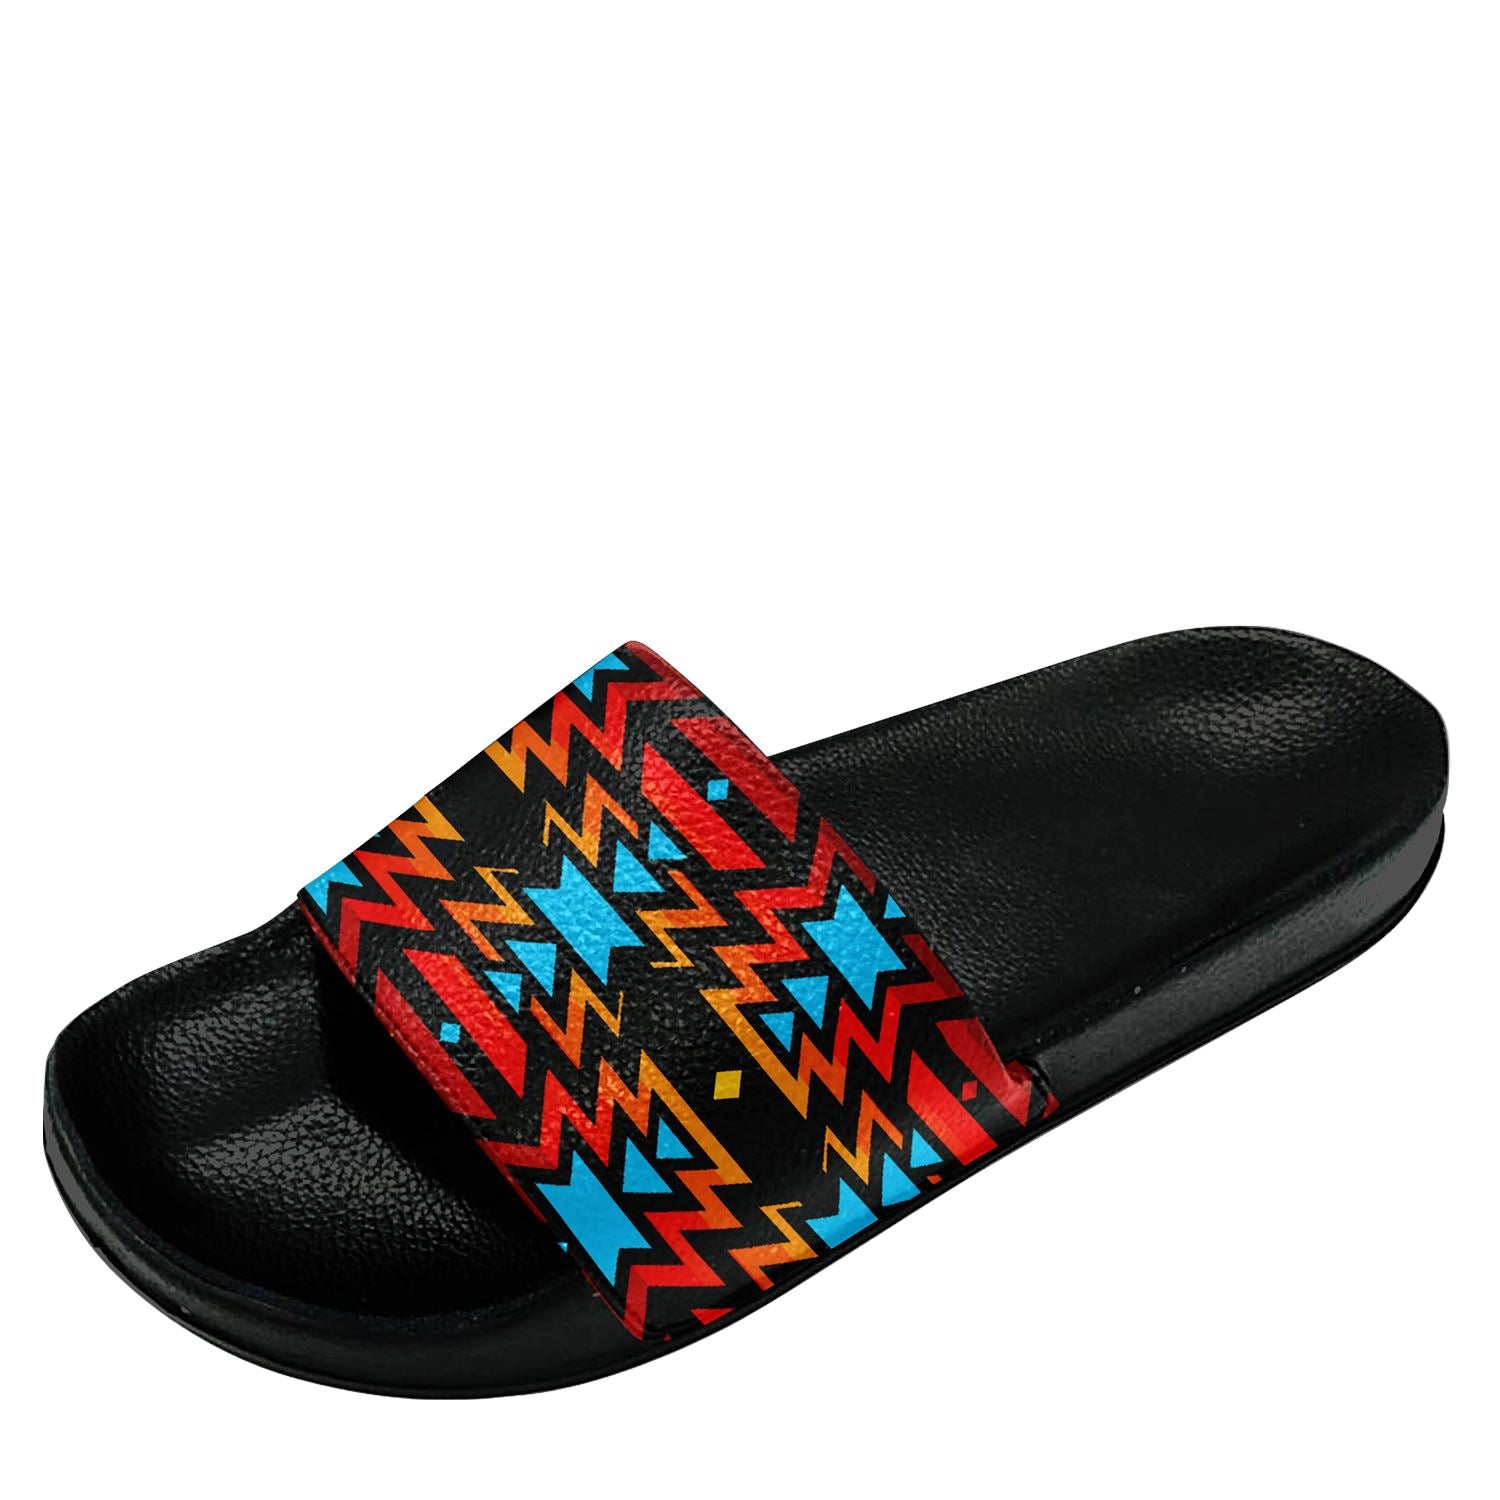 Black Fire and Turquoise Slide Sandals 49 Dzine 